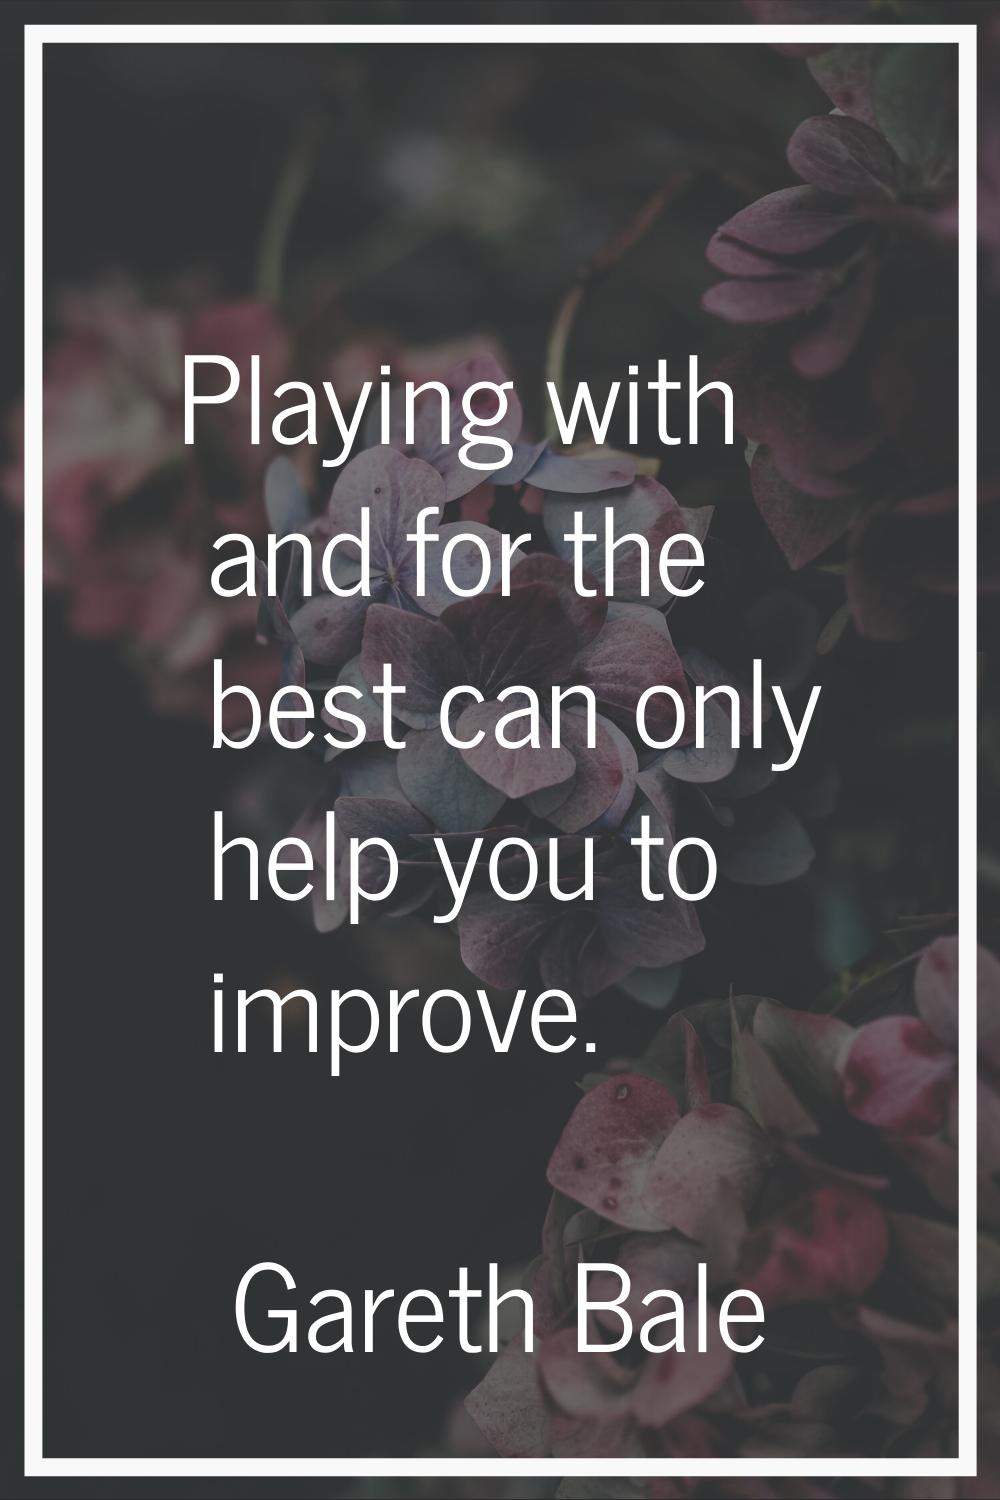 Playing with and for the best can only help you to improve.